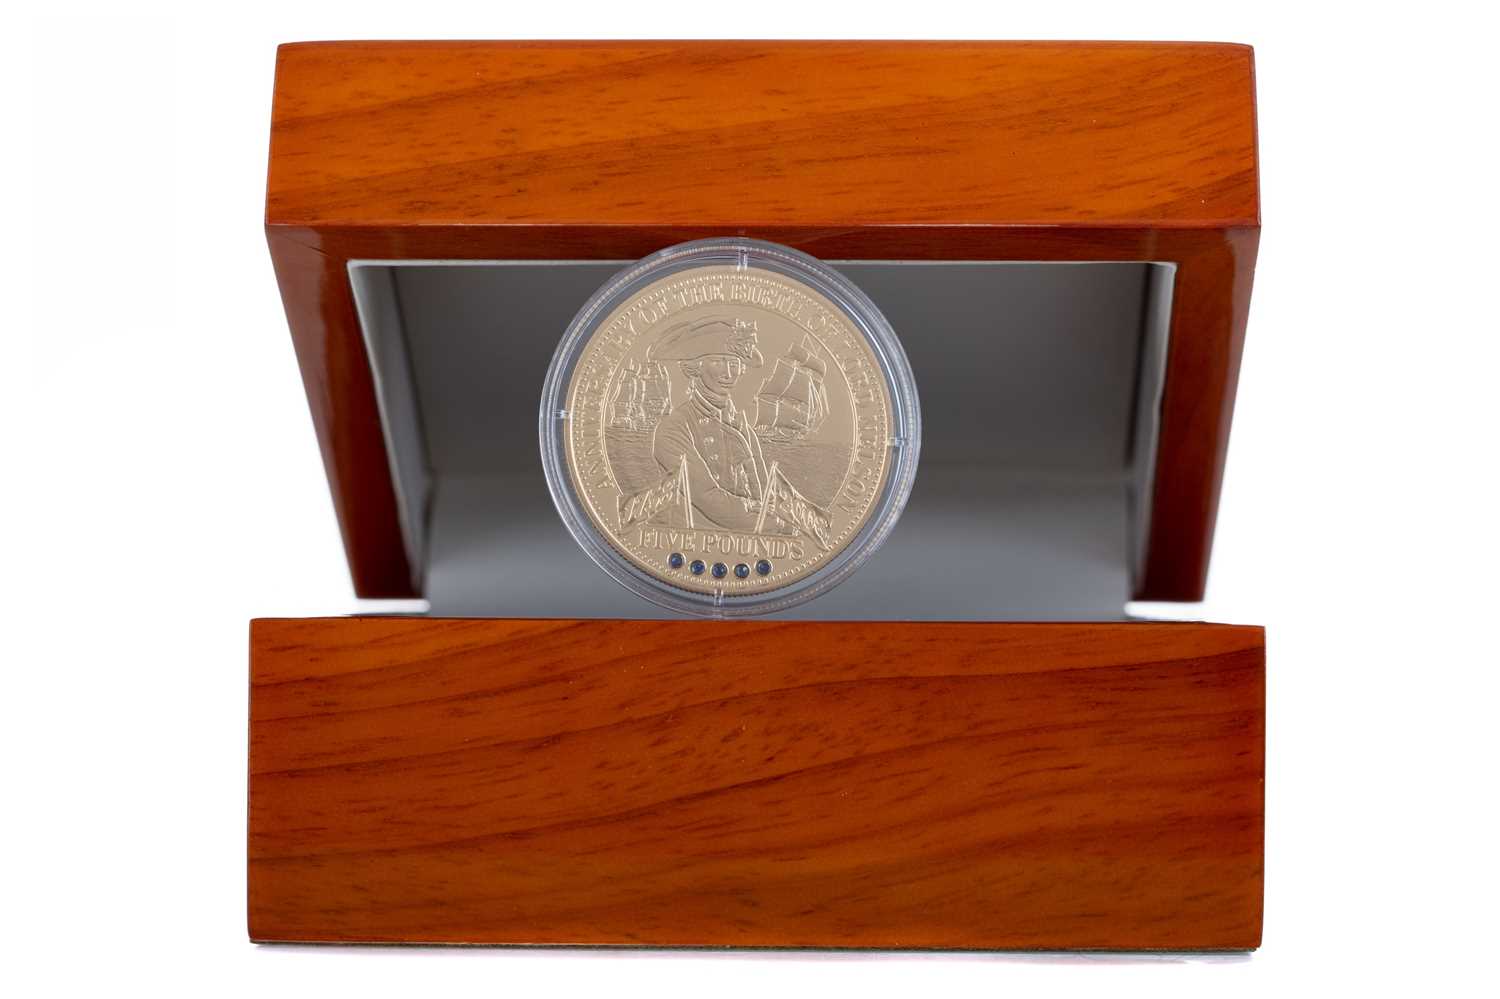 Lot 72 - A TRISTAN DA CUNHA 250TH ANNIVERSARY OF THE BIRTH OF ADMIRAL LORD NELSON GOLD PROOF FIVE POUND COIN